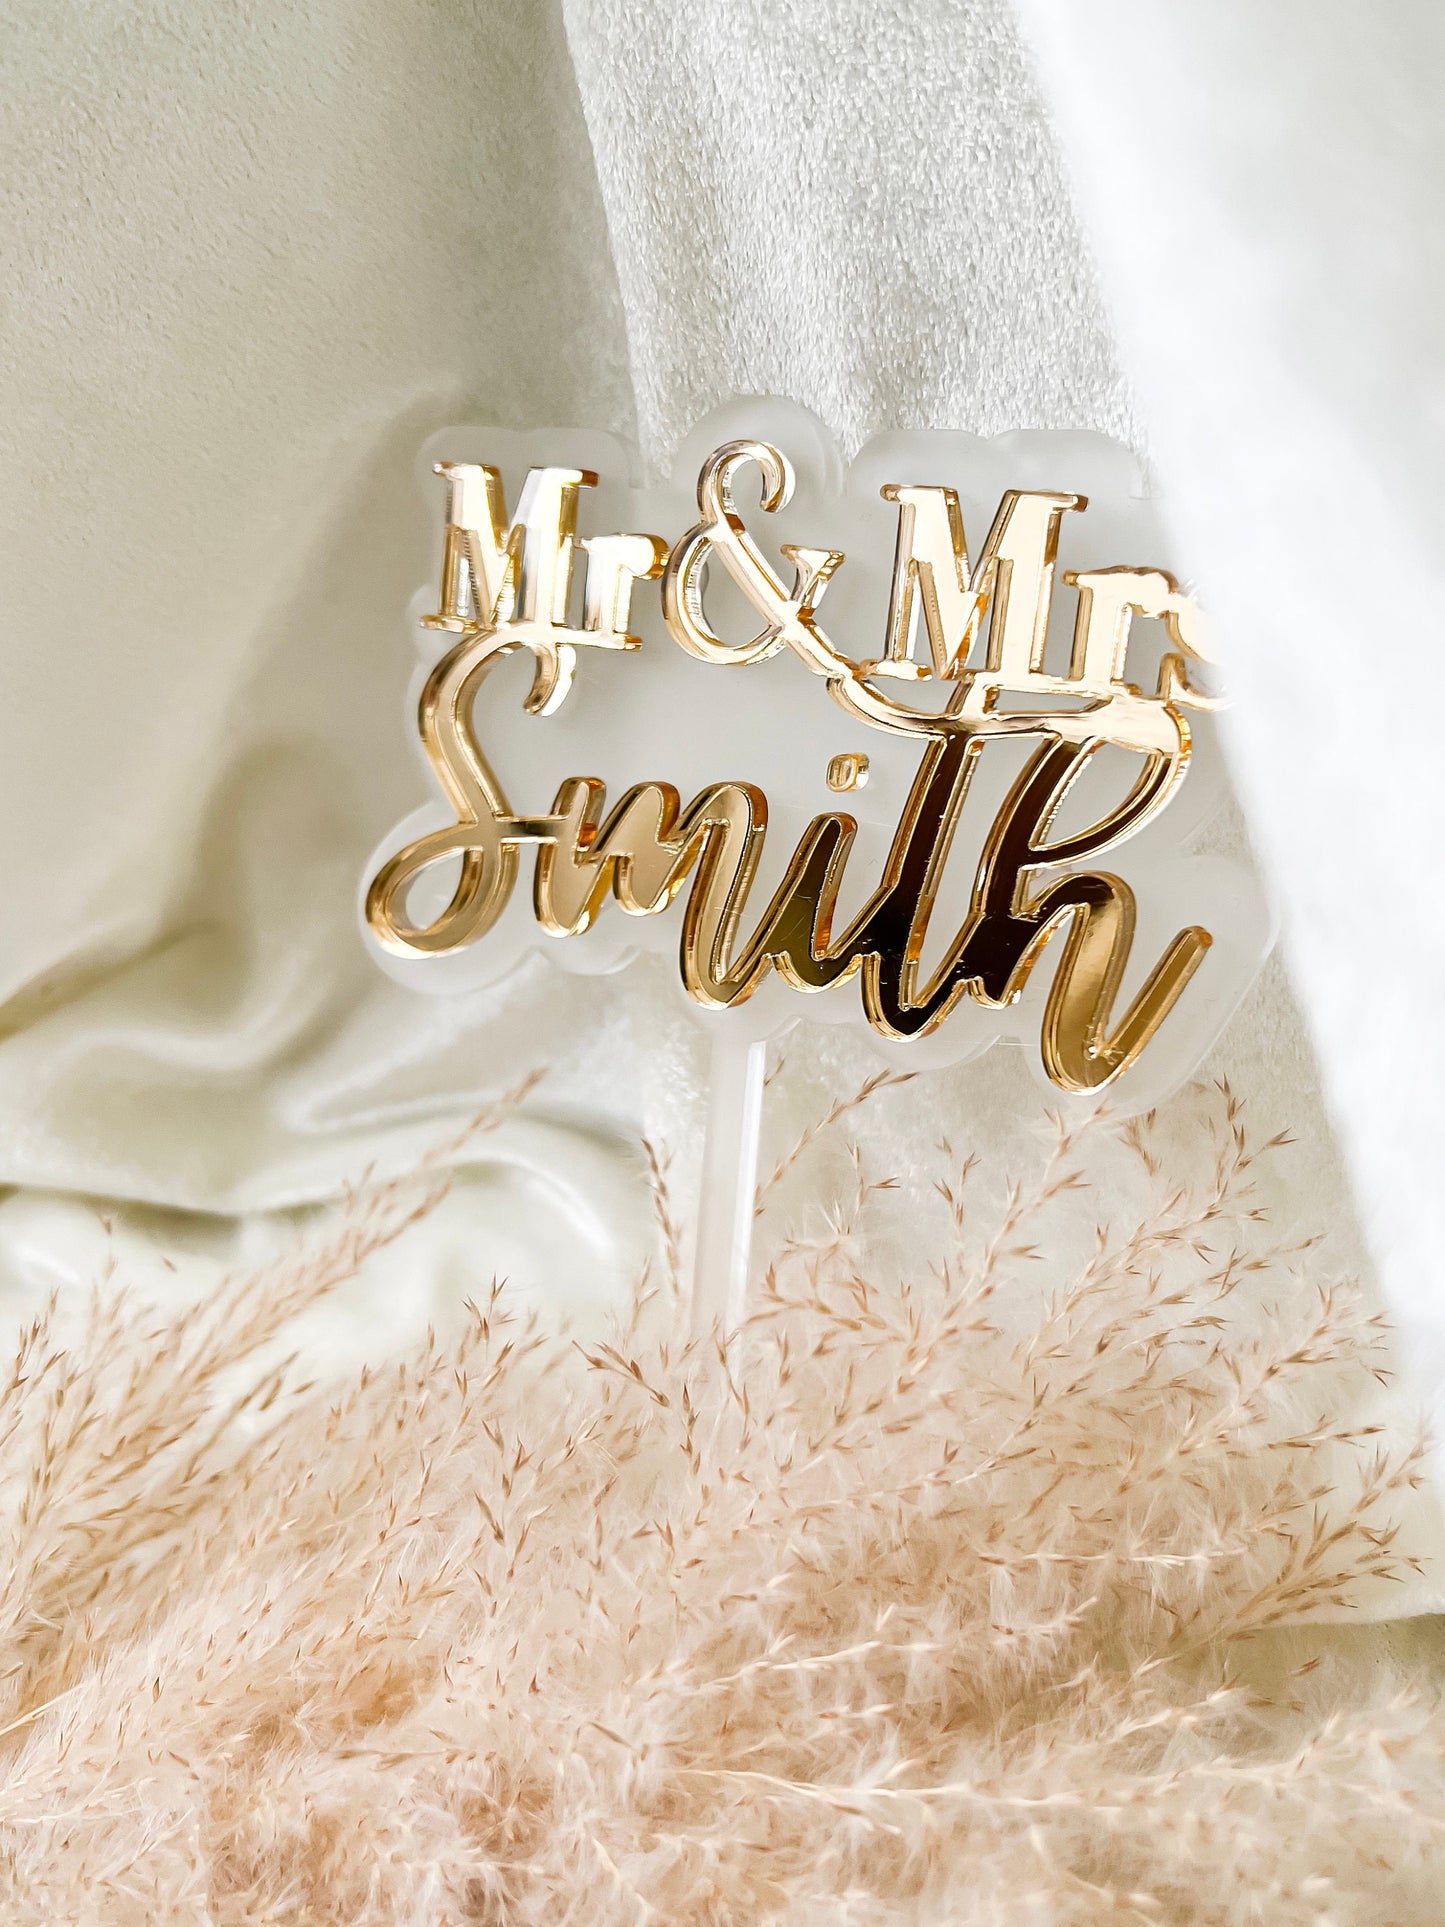 Personalised Wedding Cake Topper Mr & Mrs, Any Name Metallic Gold,3D Wedding Cake Topper ,Double Layer Acrylic Cake Topper ,Perspex Topper